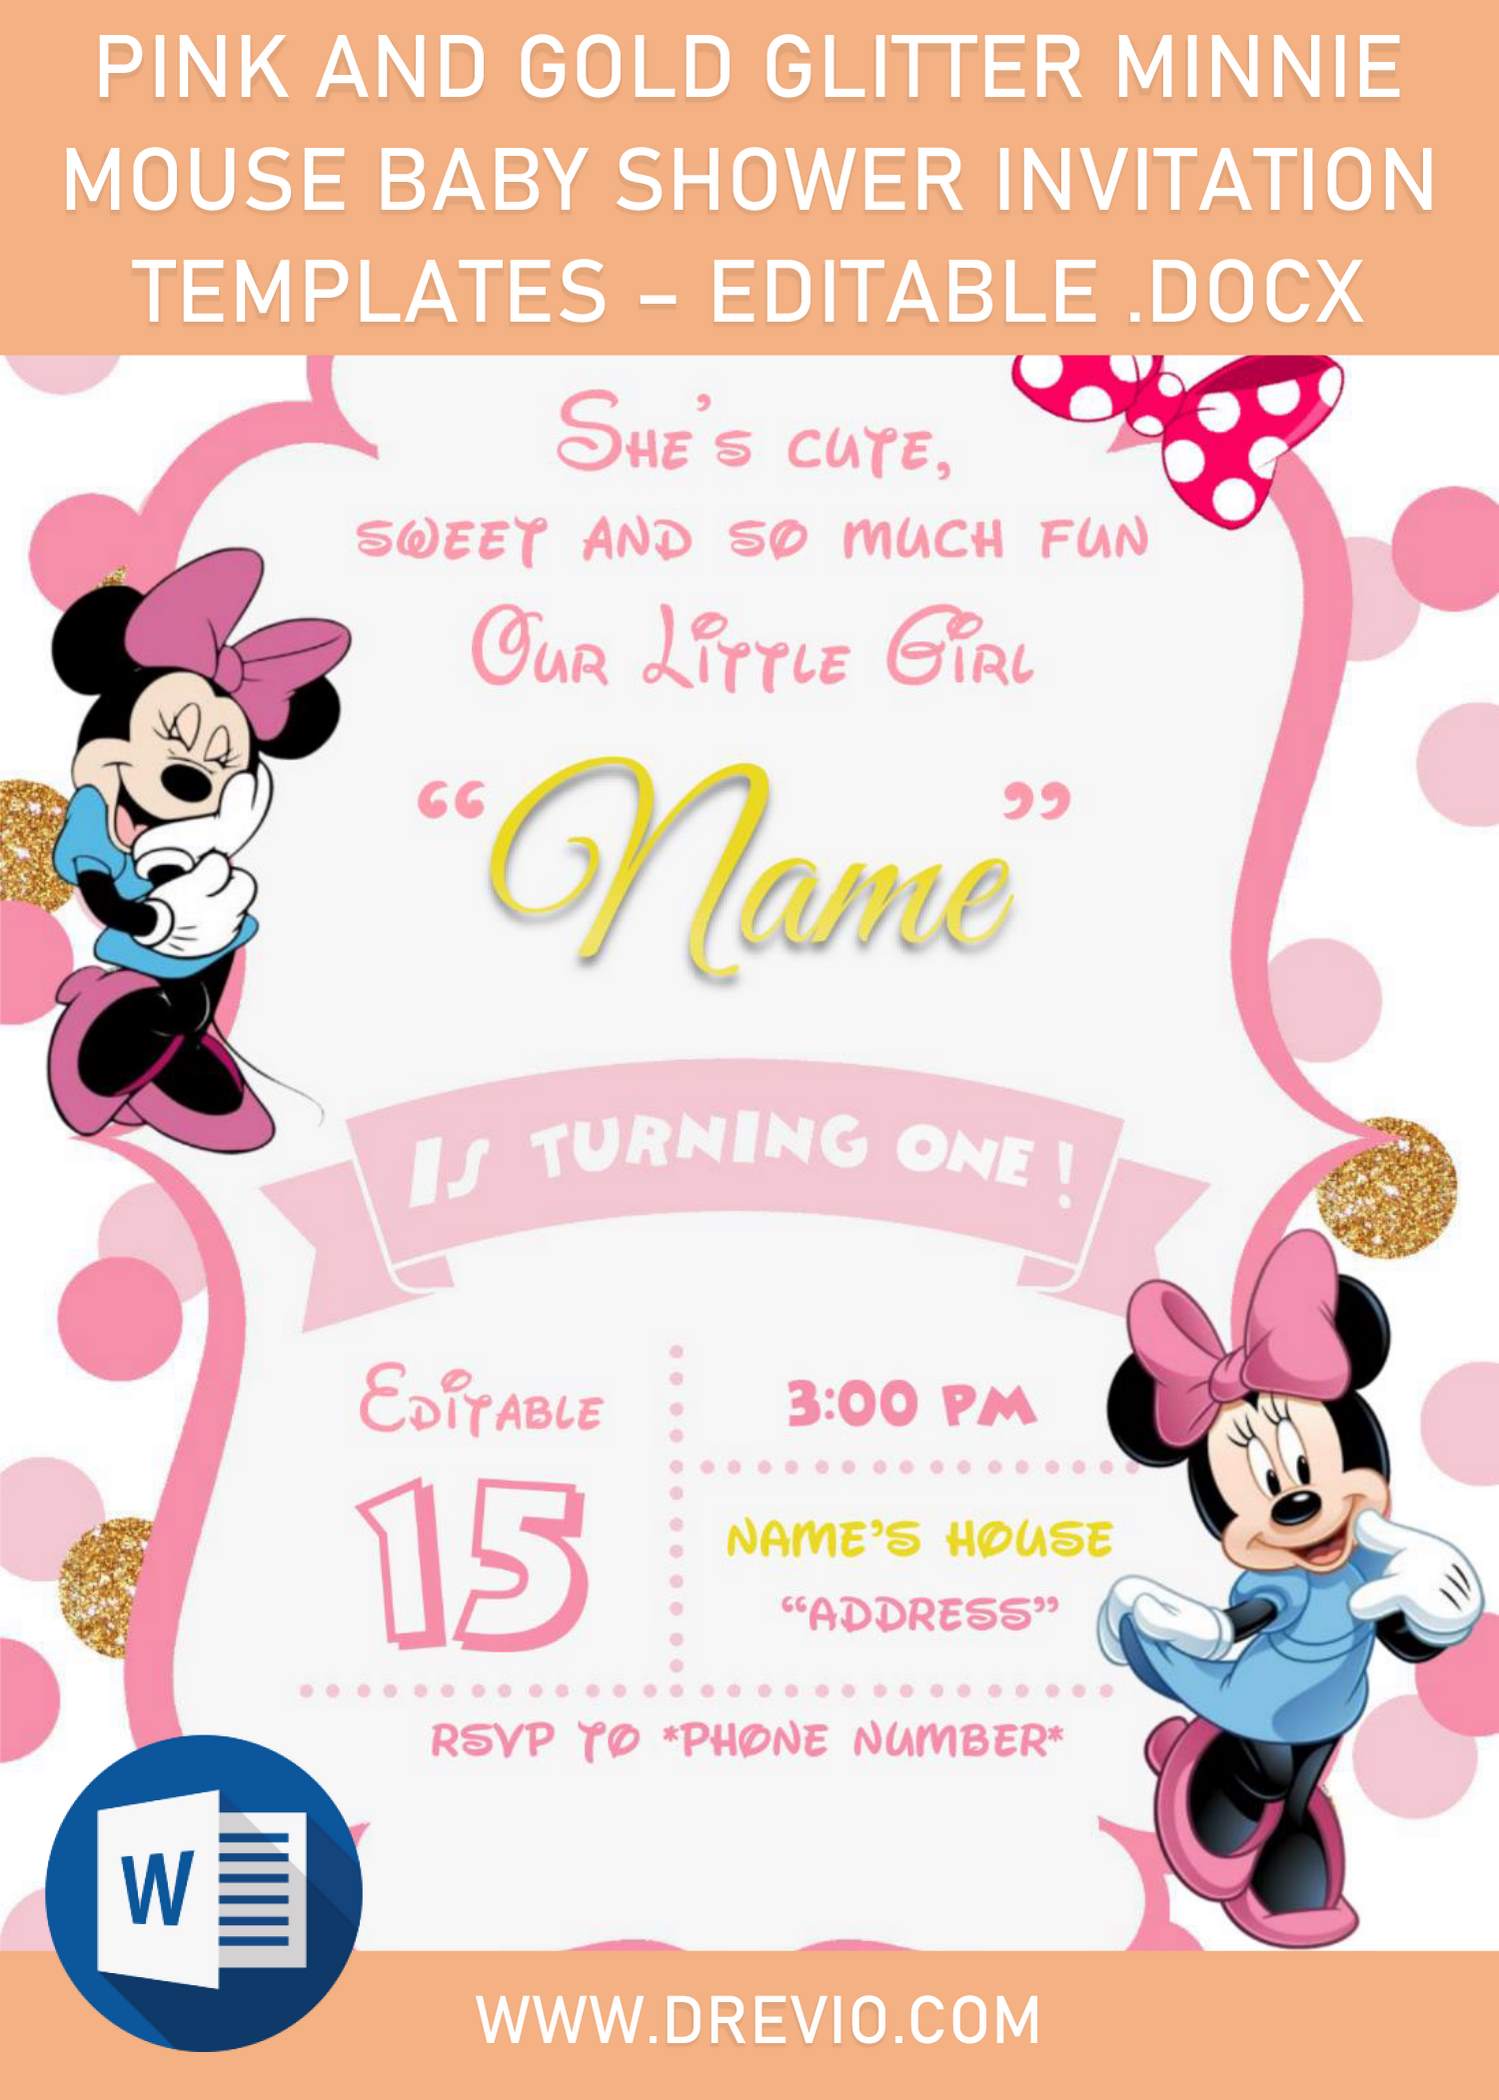 Pink And Gold Glitter Minnie Mouse Baby Shower Invitation Templates - Editable .Docx and has cute minnie